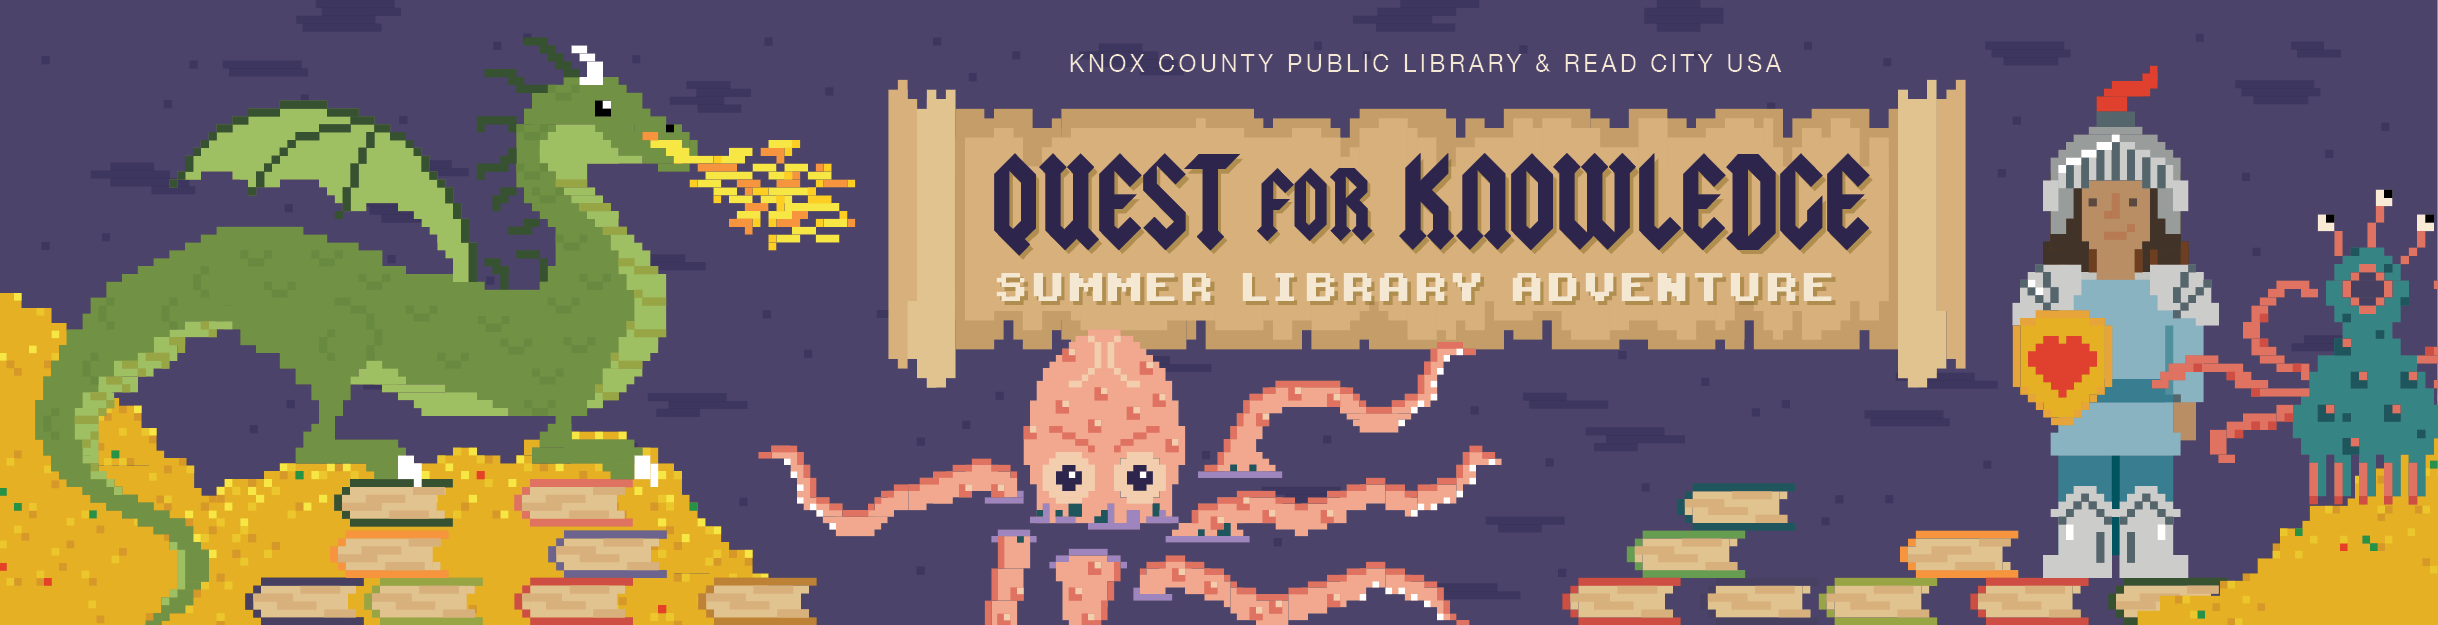 Quest for Knowledge - Summer Library Adventure